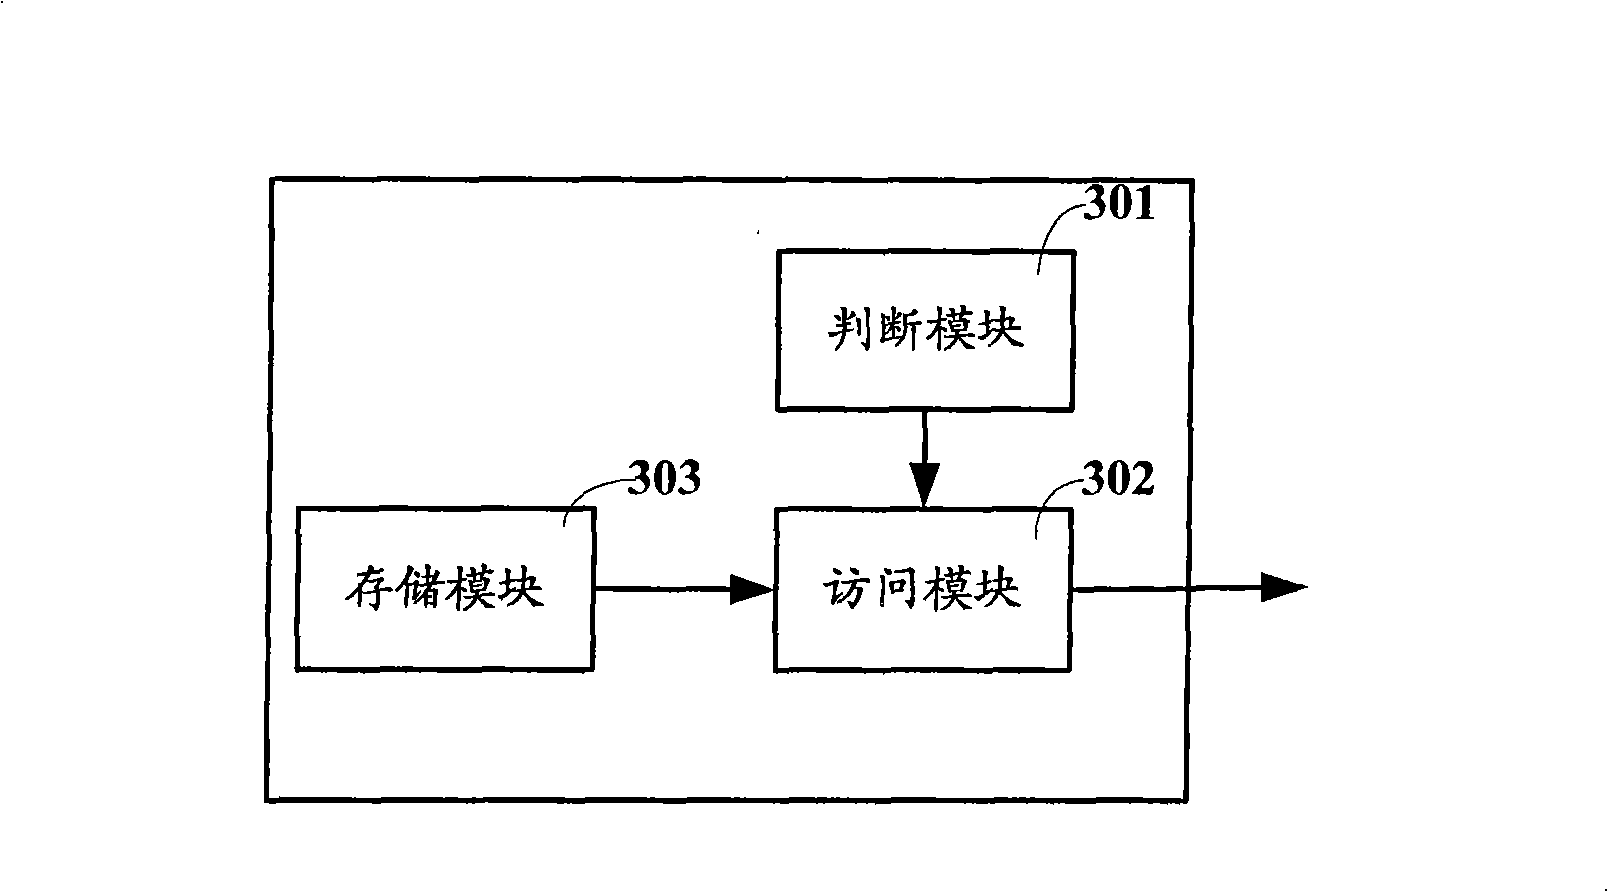 Method and apparatus for data protection of memory device